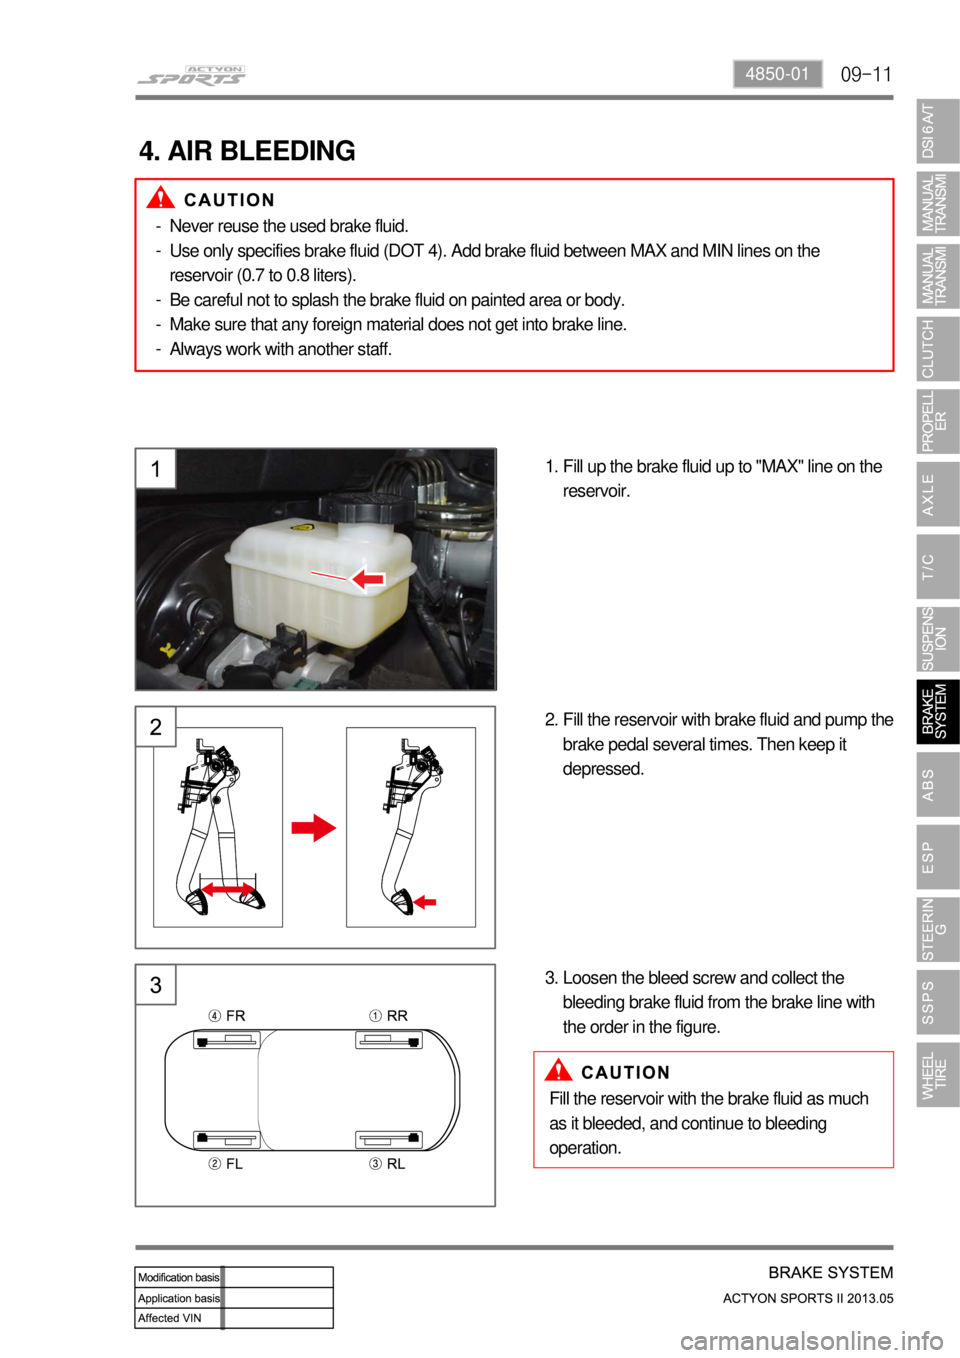 SSANGYONG NEW ACTYON SPORTS 2013  Service Manual 09-114850-01
4. AIR BLEEDING
Fill up the brake fluid up to "MAX" line on the 
reservoir. 1.
Fill the reservoir with brake fluid and pump the 
brake pedal several times. Then keep it 
depressed. 2.
Loo